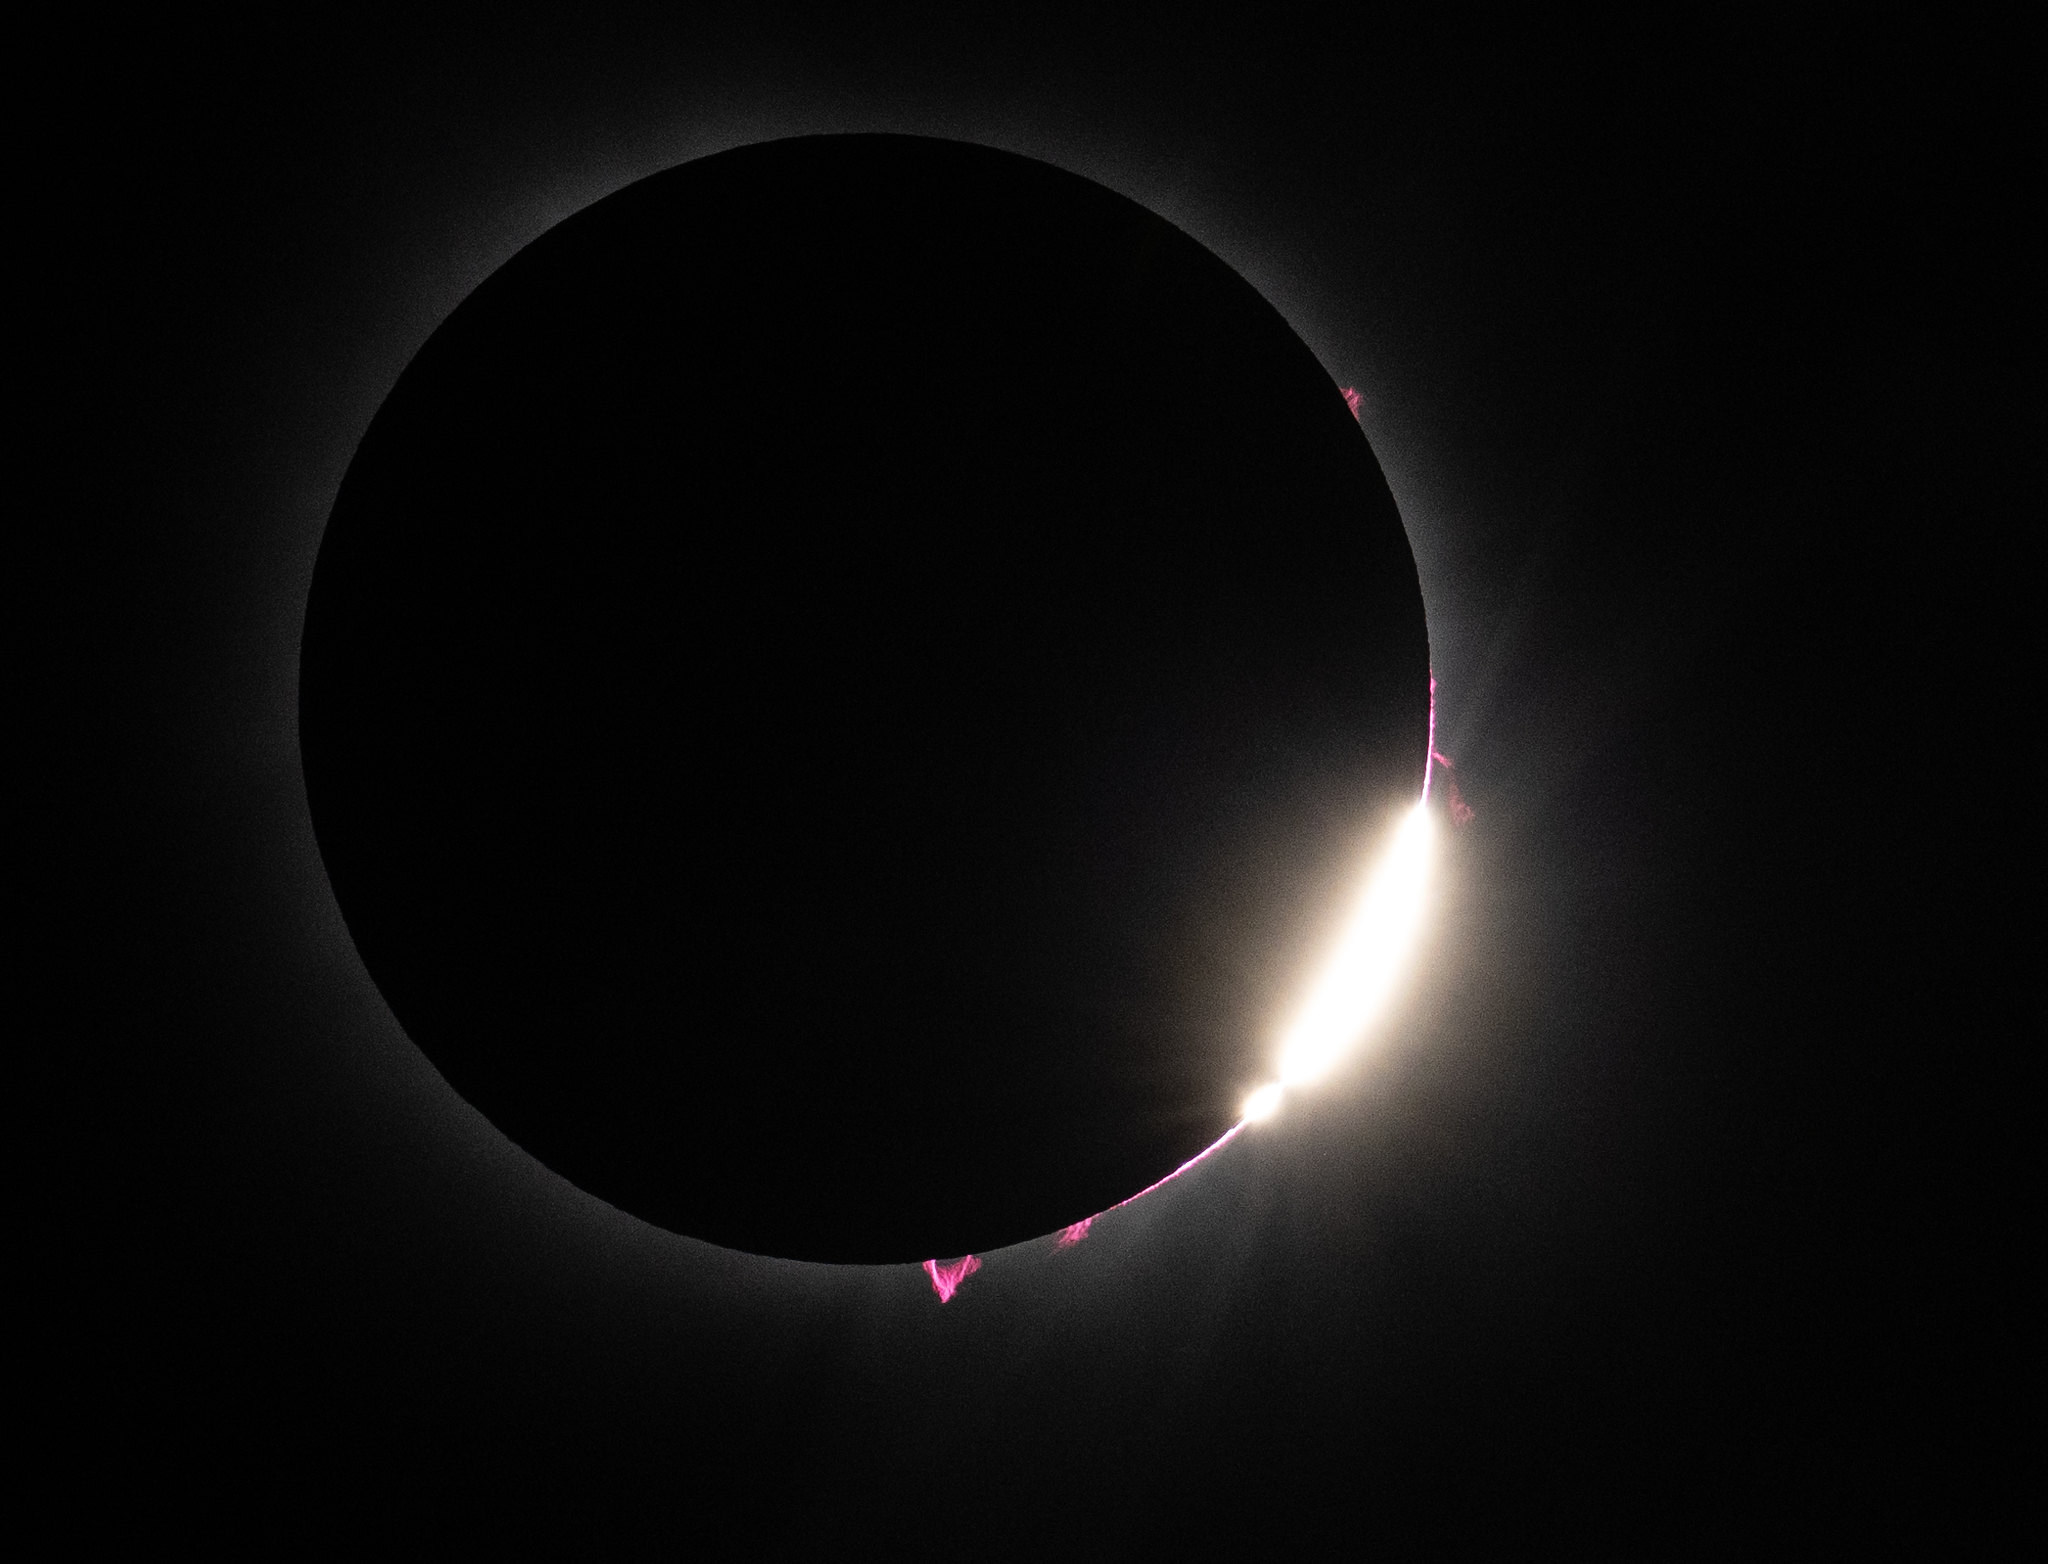 The total solar eclipse. A large black circle against a black background. A faint white glow is seen around the rim of the black circle. On the bottom right, a bright burst of light peeks out. Toward the center of the bottom of the circle, a bright pink, slightly transparent bit of solar matter flows against the black background. A few other spots of bright pink material can be seen on the right area of the circle.